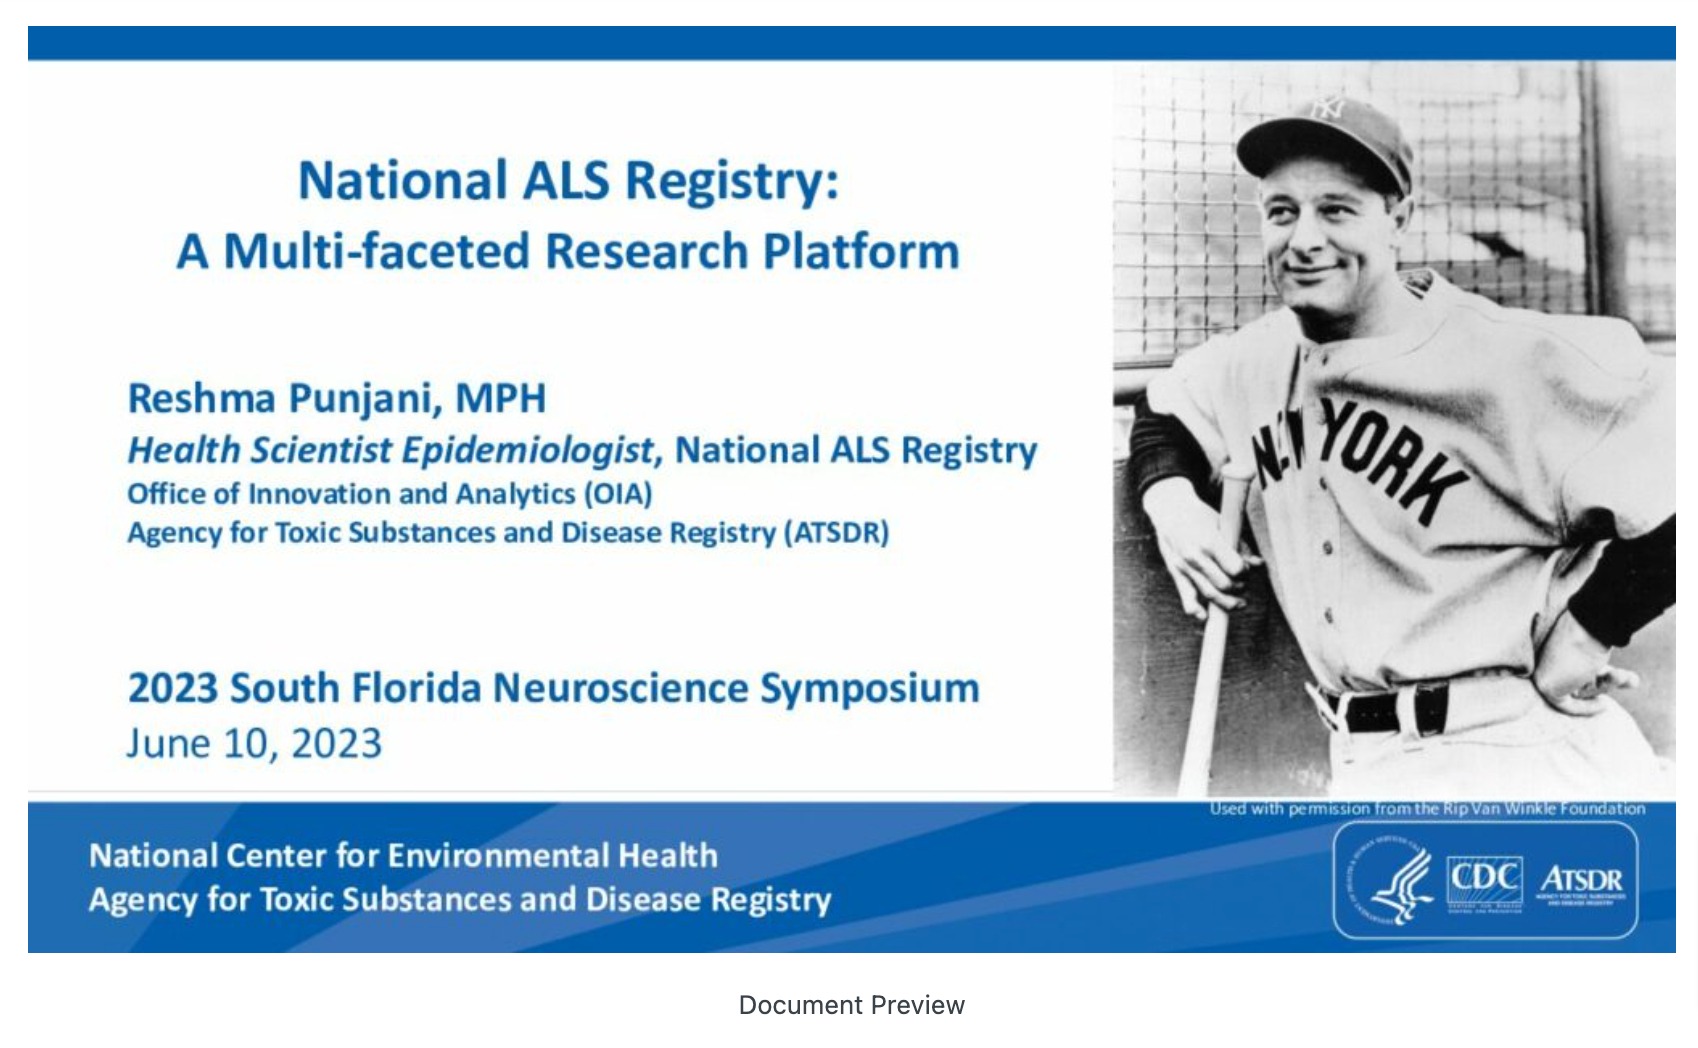 National ALS Registry & Upcoming Research